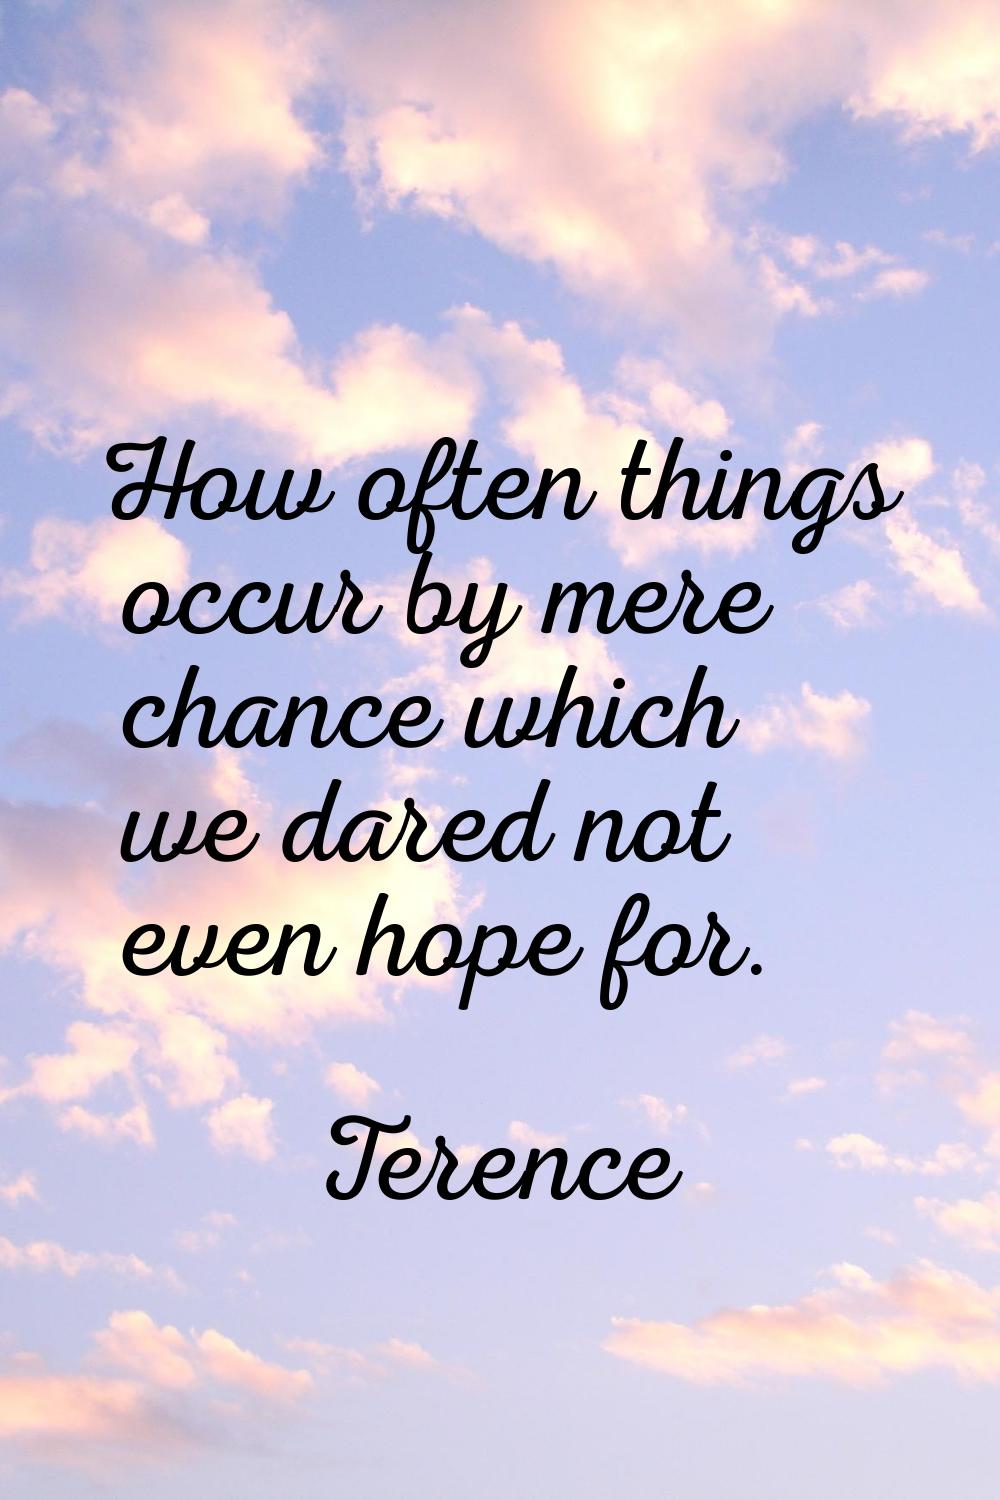 How often things occur by mere chance which we dared not even hope for.